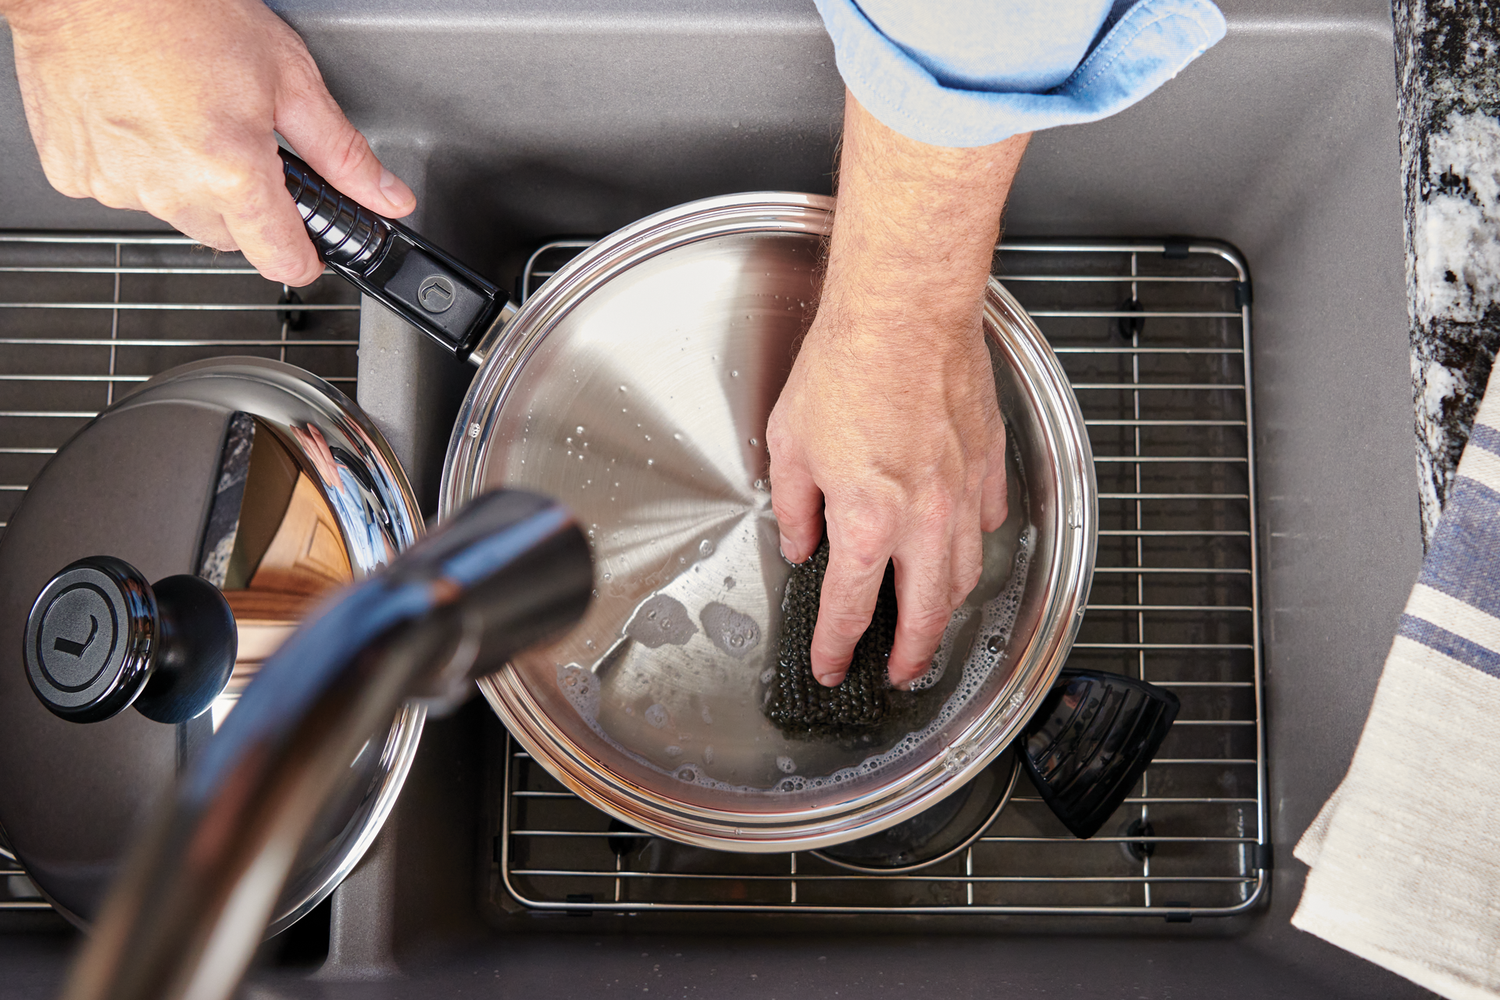 A Lifetime Cookware Pot Being Washed in the Sink